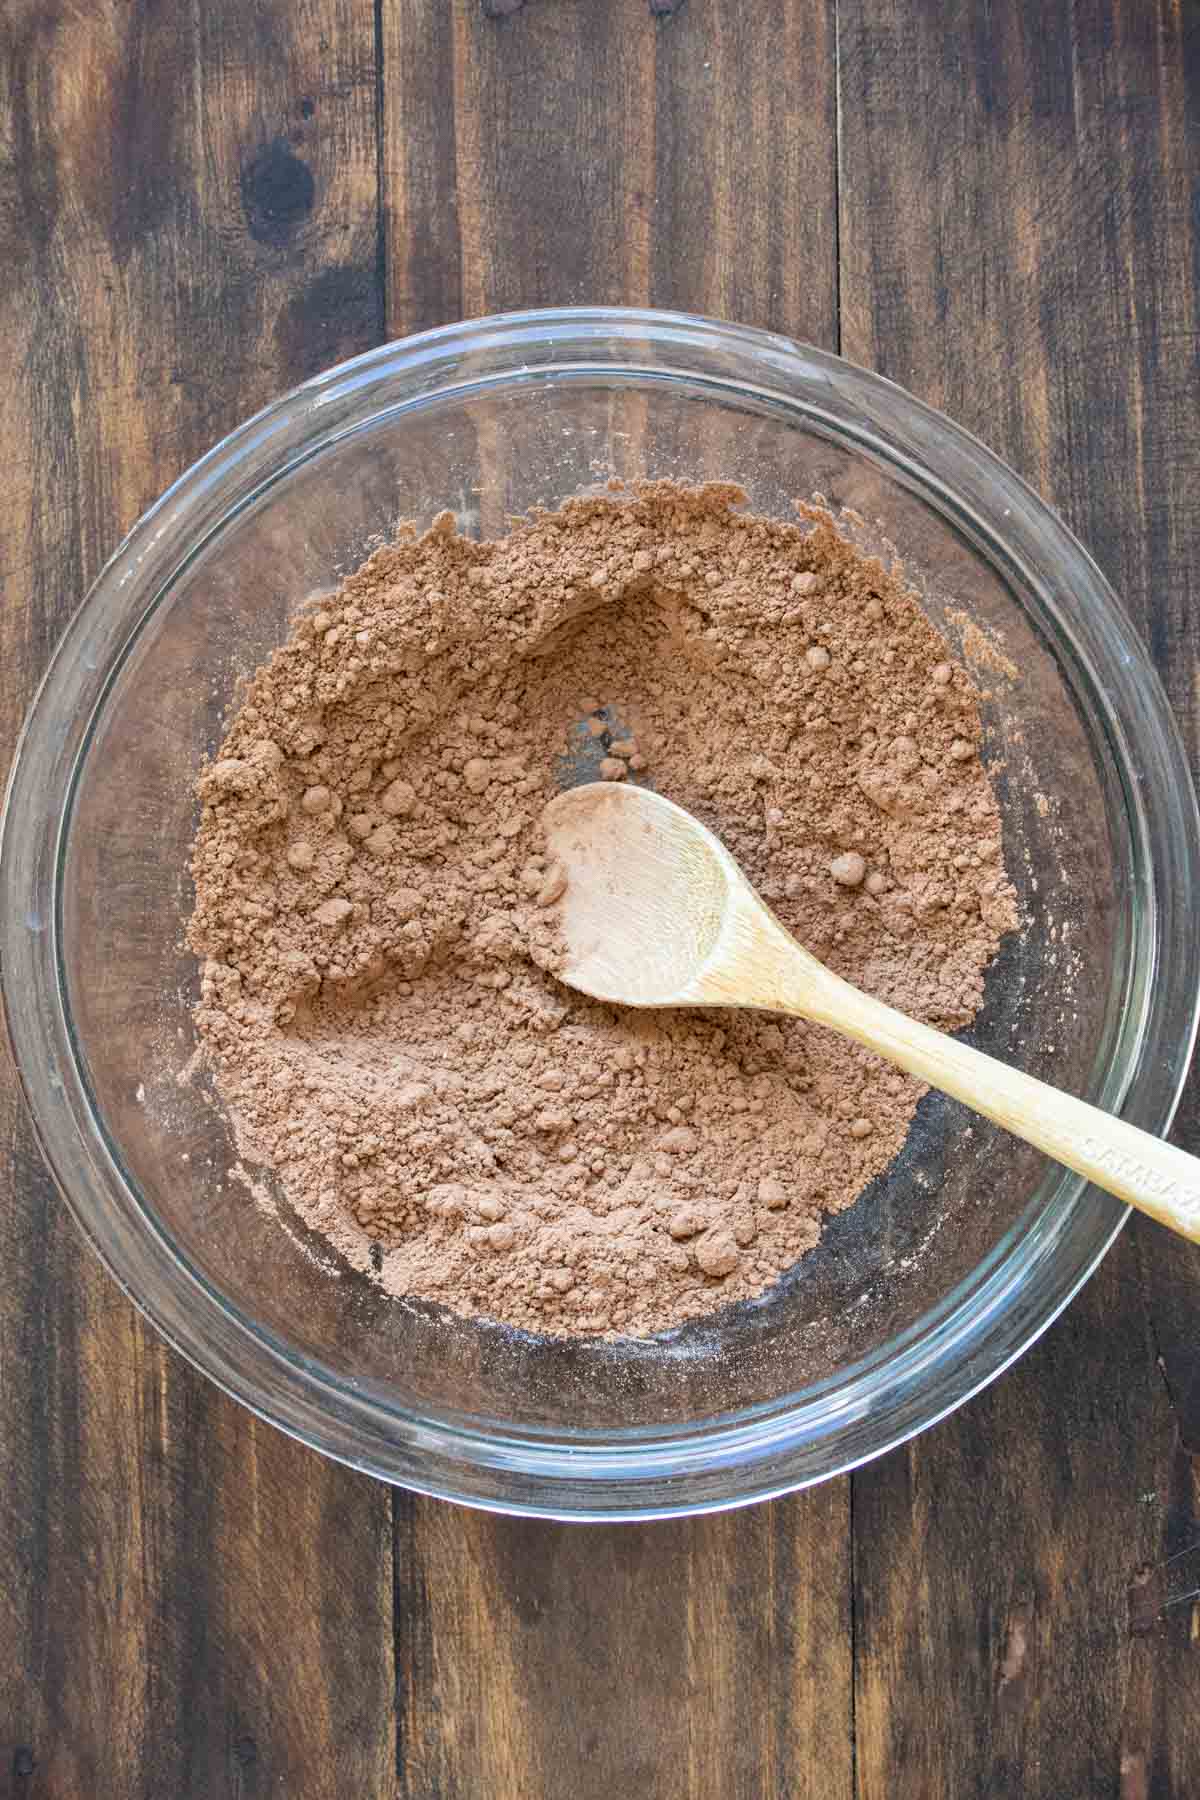 Wooden spoon mixing cocoa powder and sugar in a glass bowl.